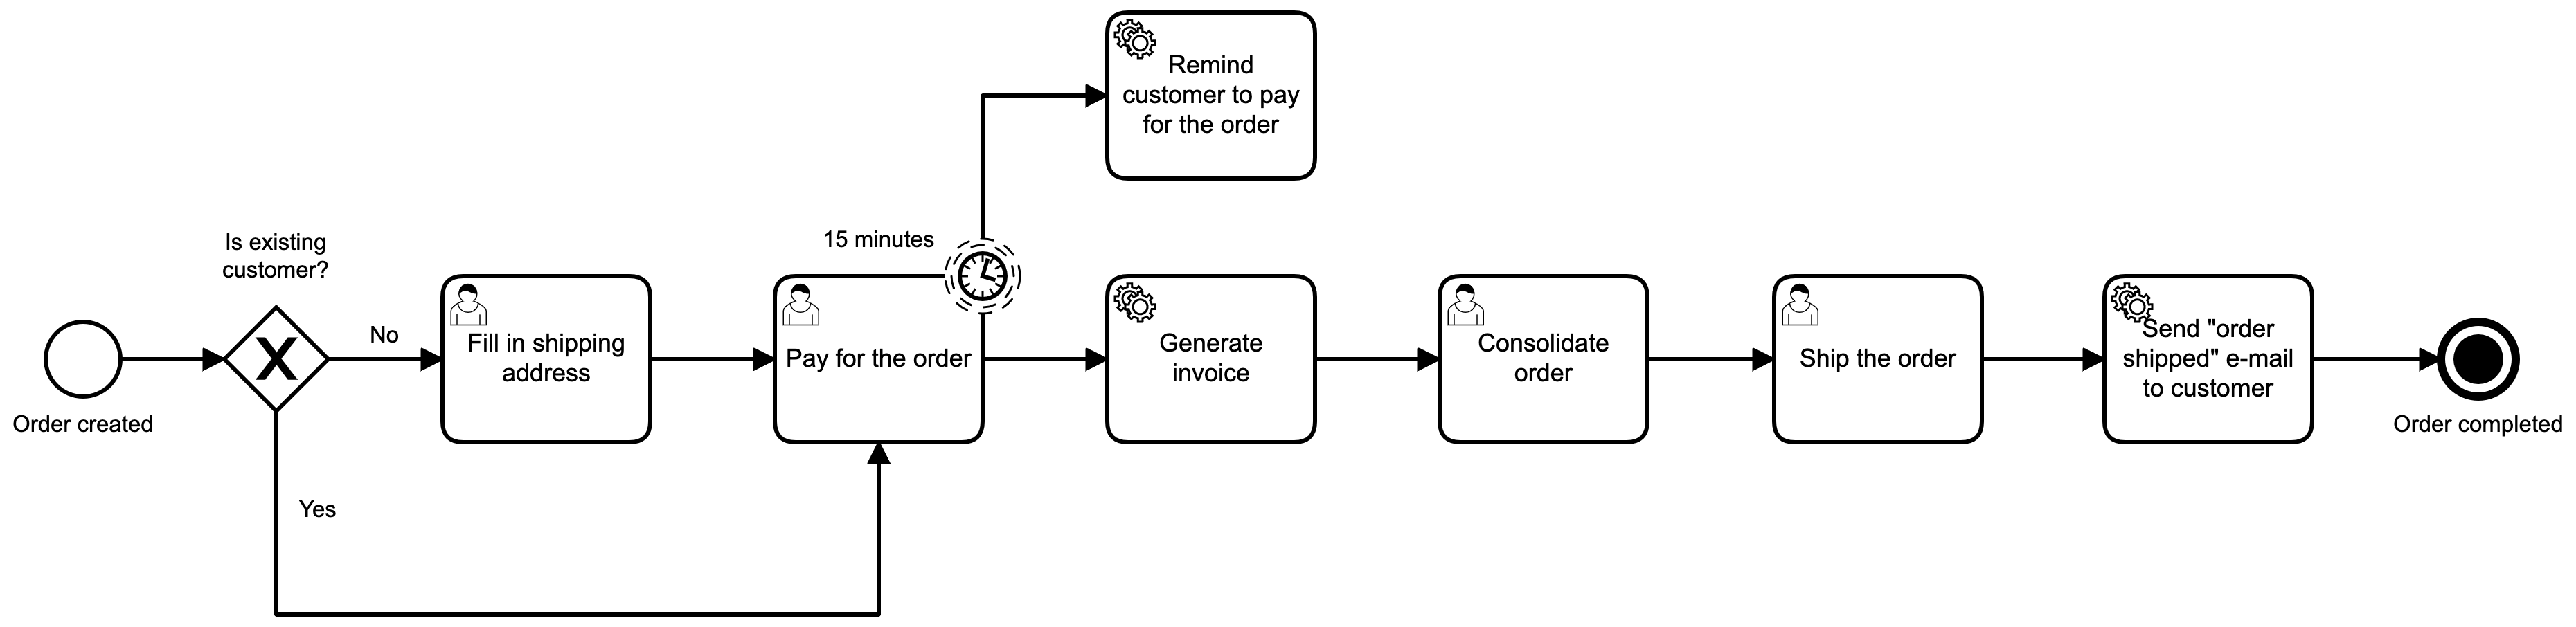 Camunda flow with boundary timer event, user tasks, service tasks, conditional gateway, start and end events for automating customer checkout process